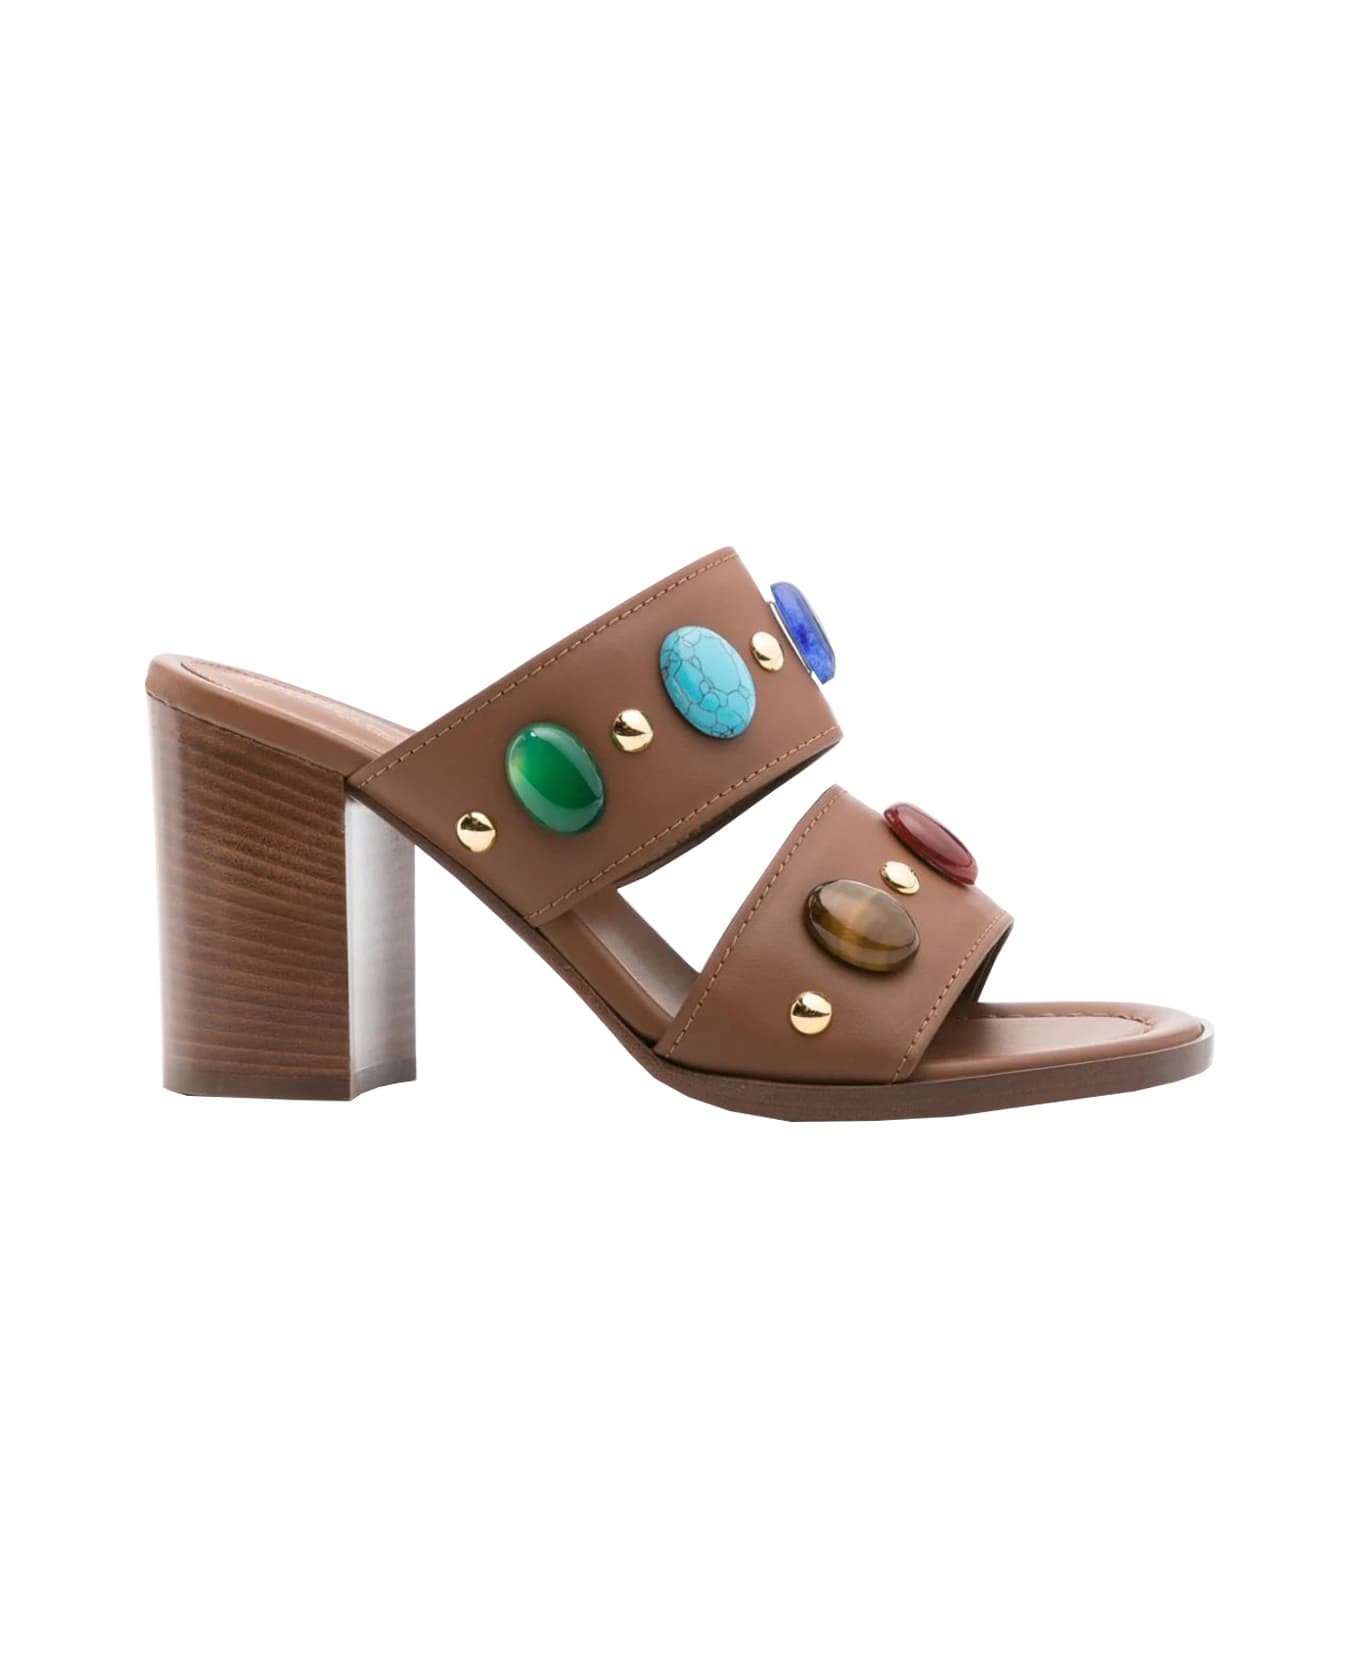 Gianvito Rossi Shoes With Heel - Brown